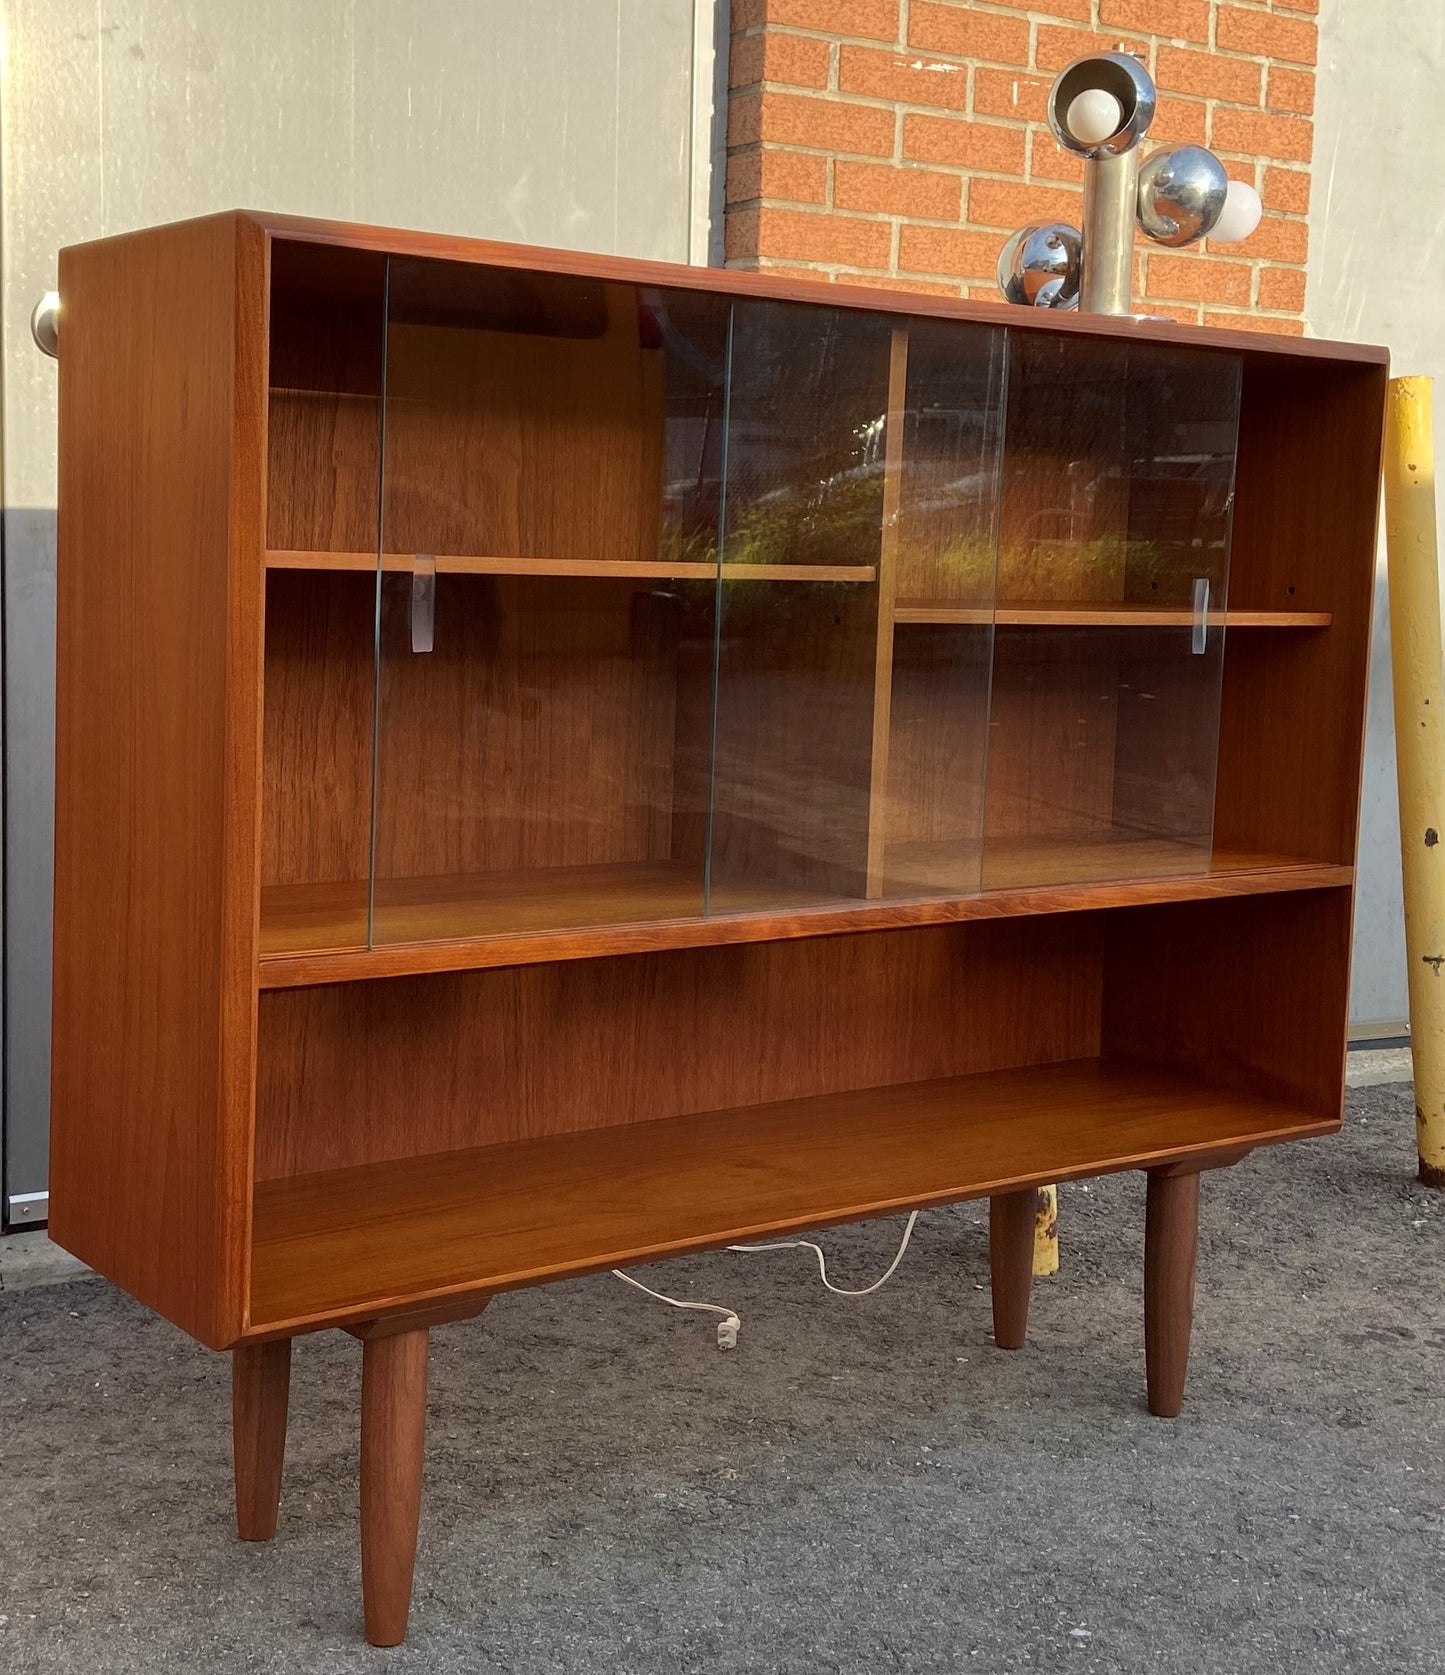 REFINISHED Mid Century Modern Teak Bookcase Display 48", Perfect